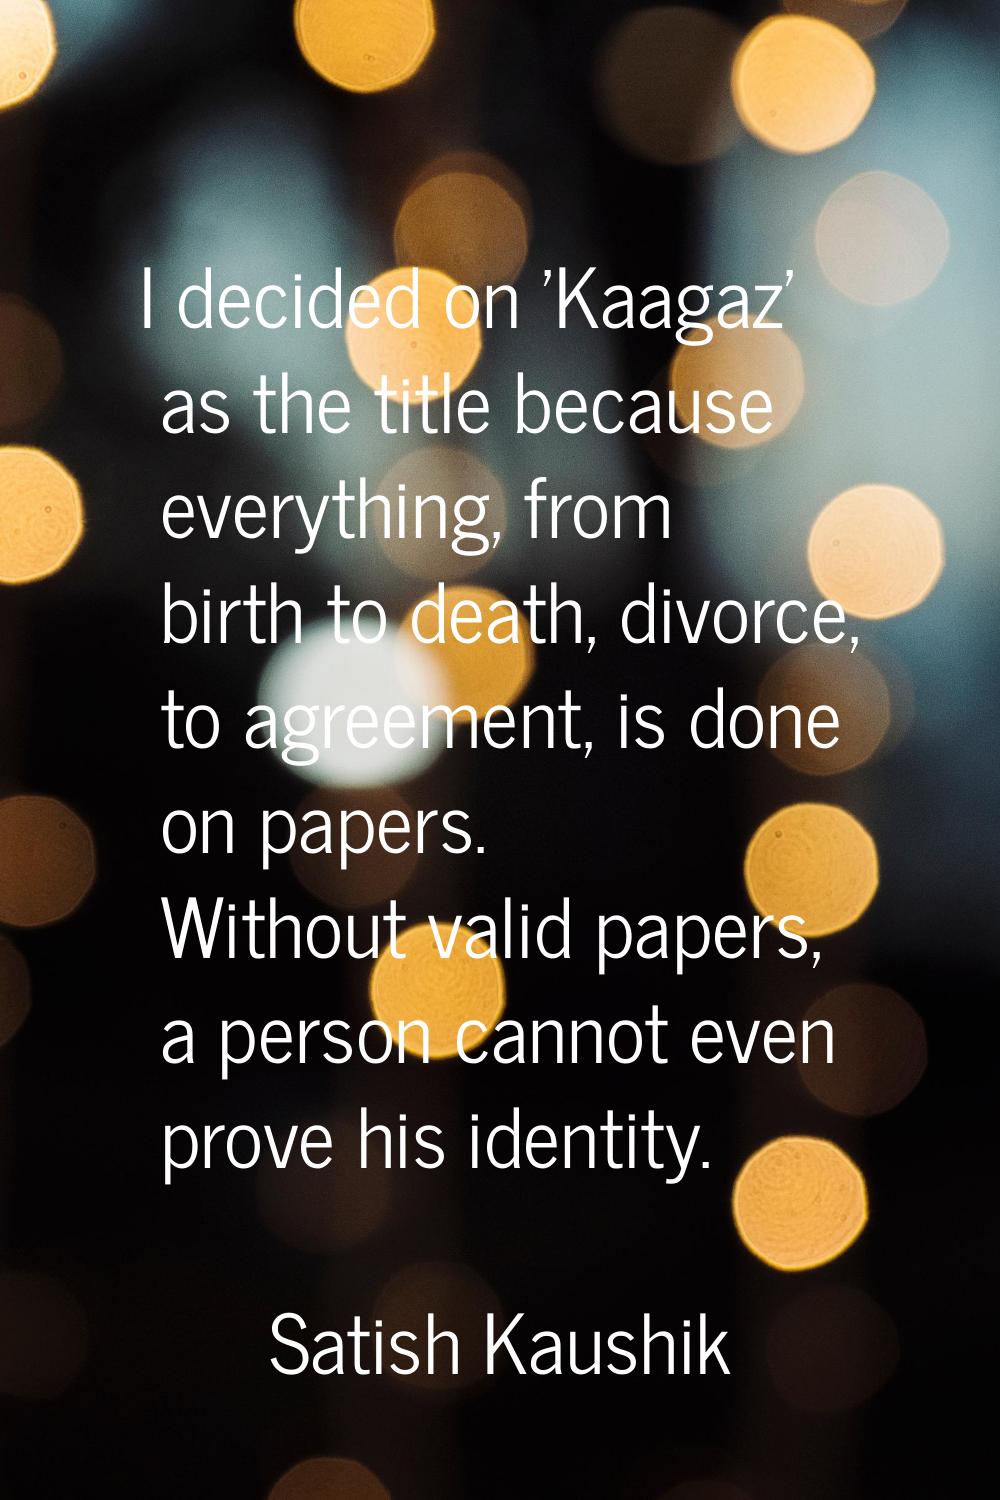 I decided on 'Kaagaz' as the title because everything, from birth to death, divorce, to agreement, 